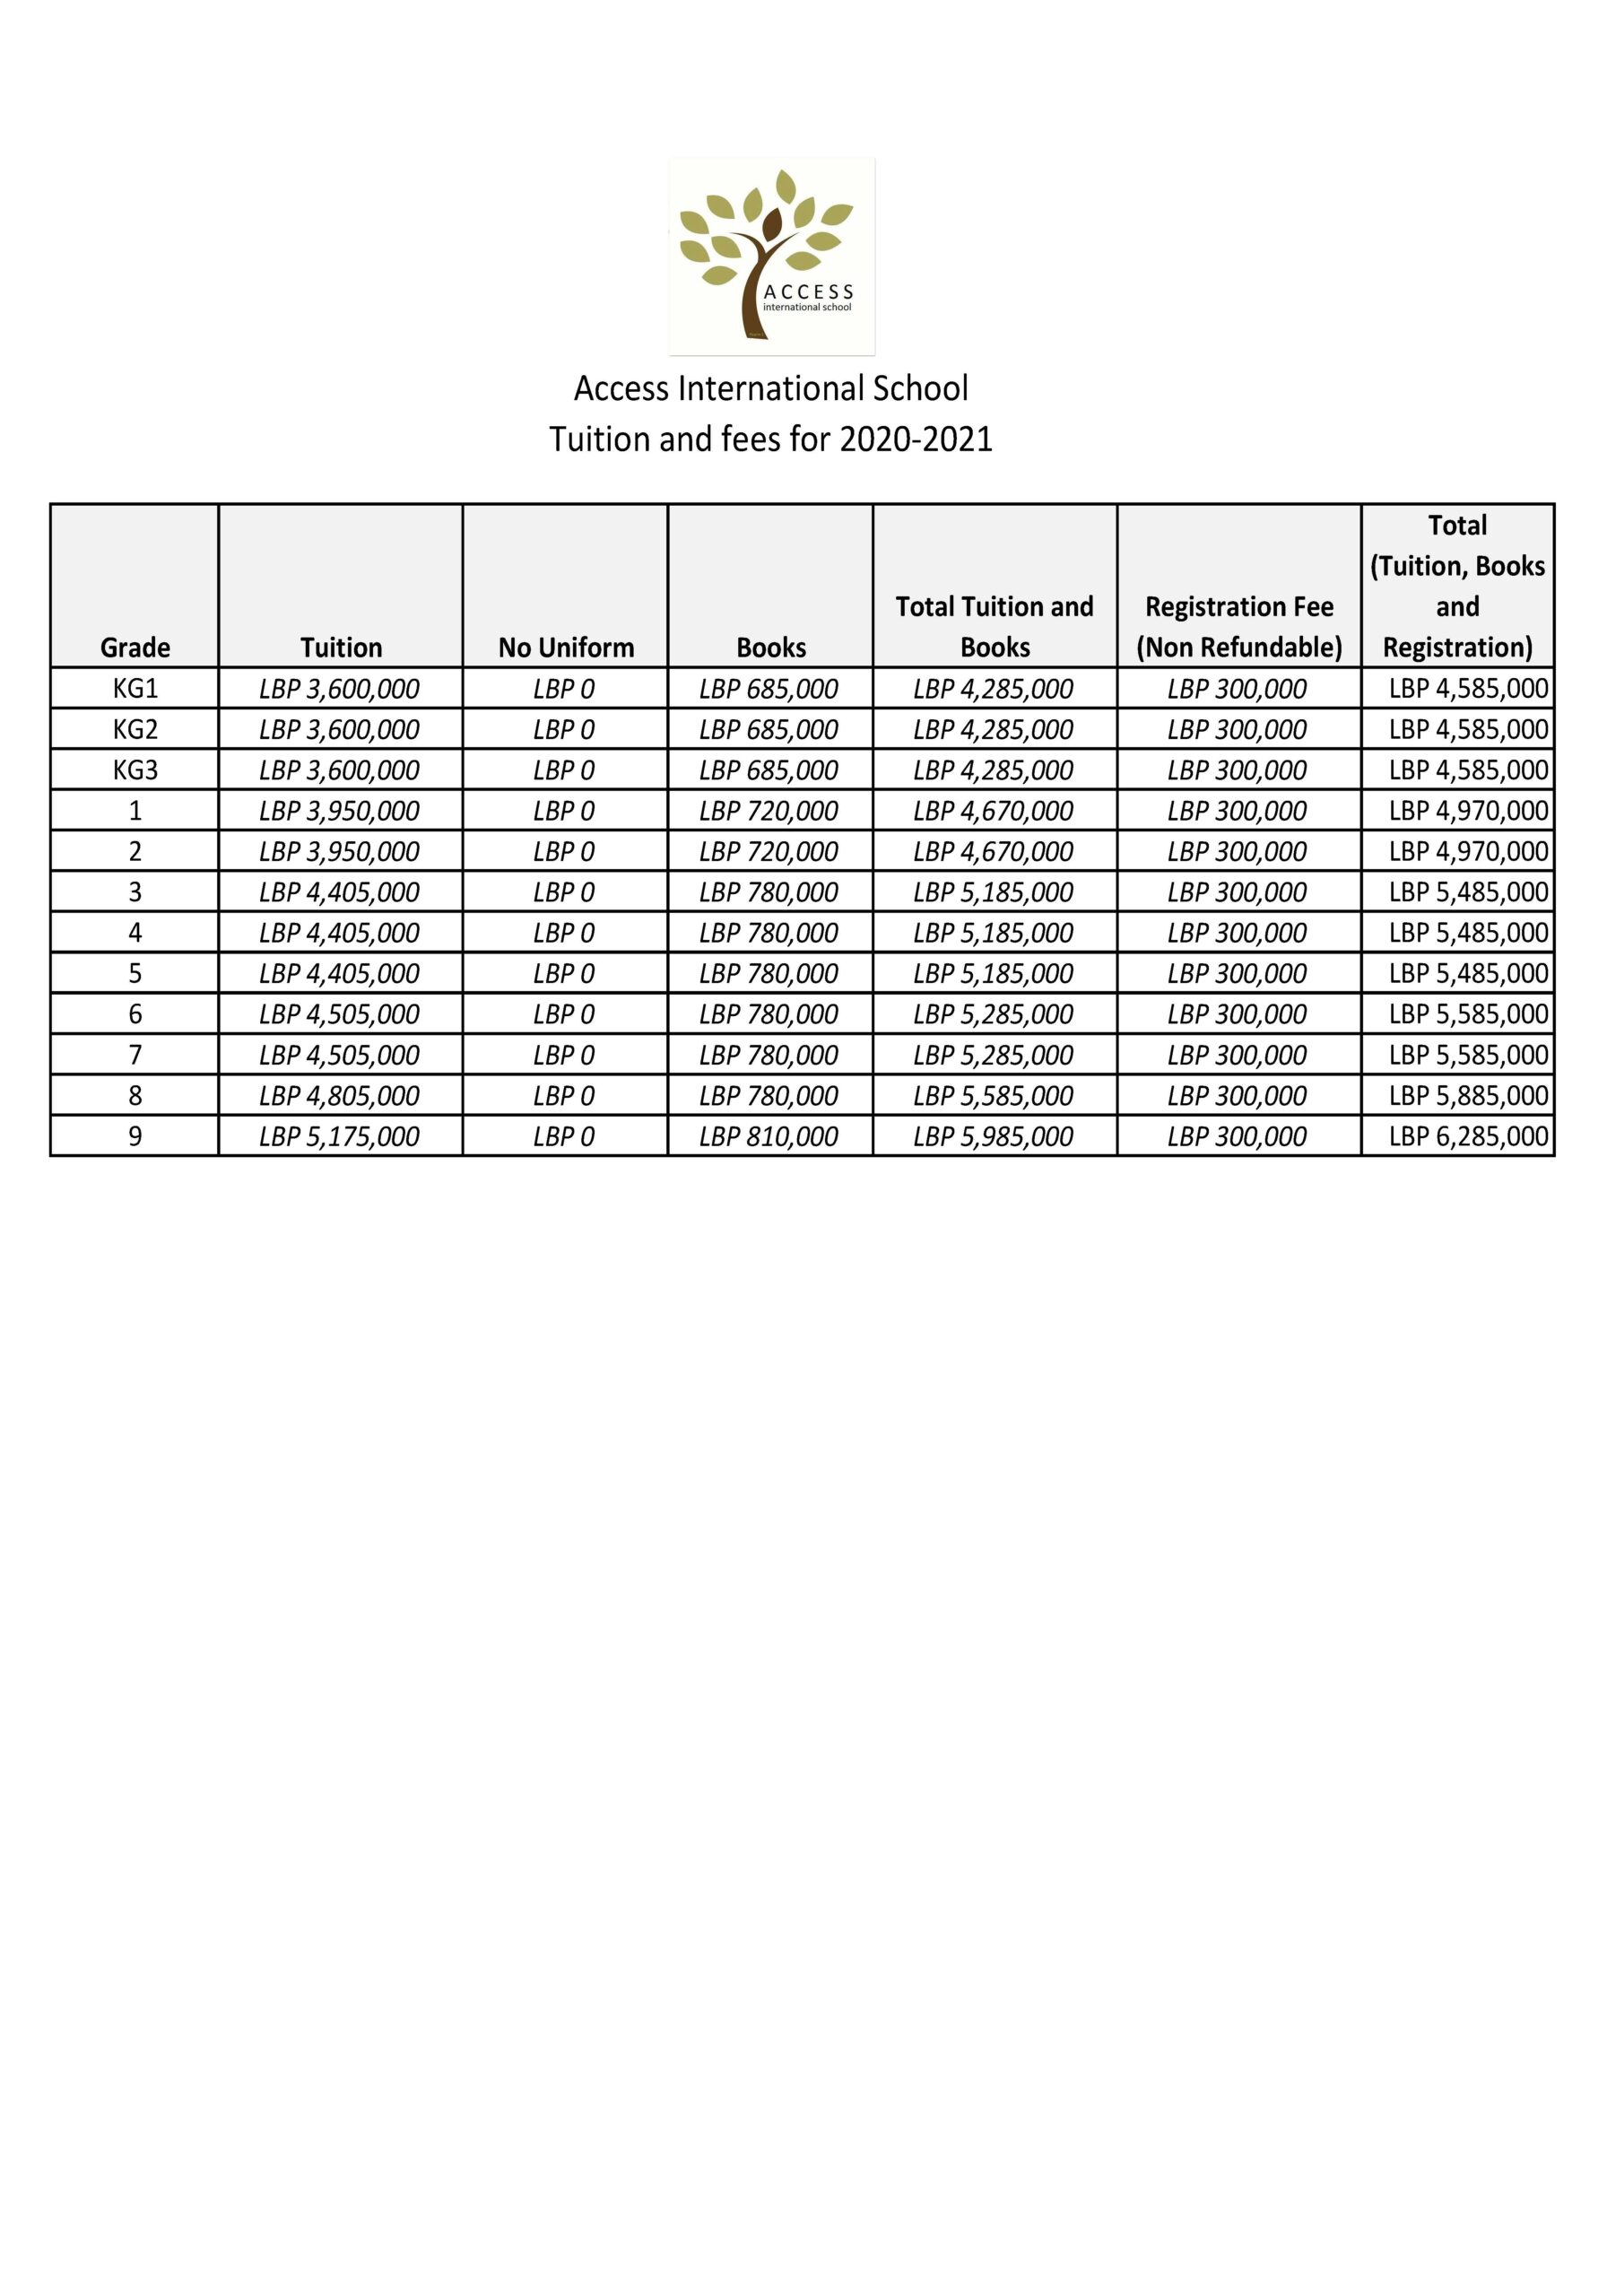 Access International School Tuition and Fees Schedule